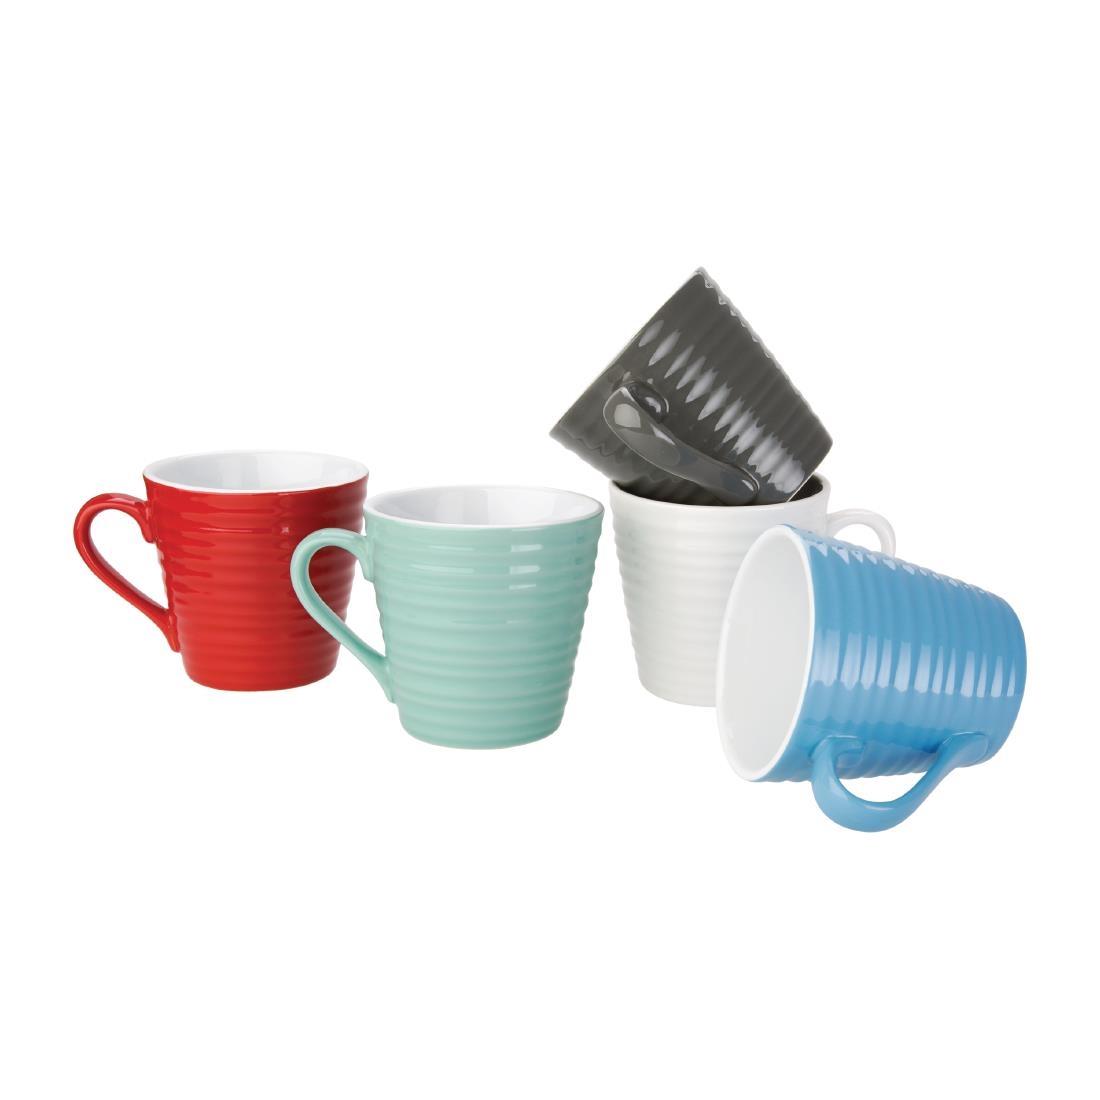 Olympia Café Aroma Mugs Red 340ml (Pack of 6) - DH632  - 5